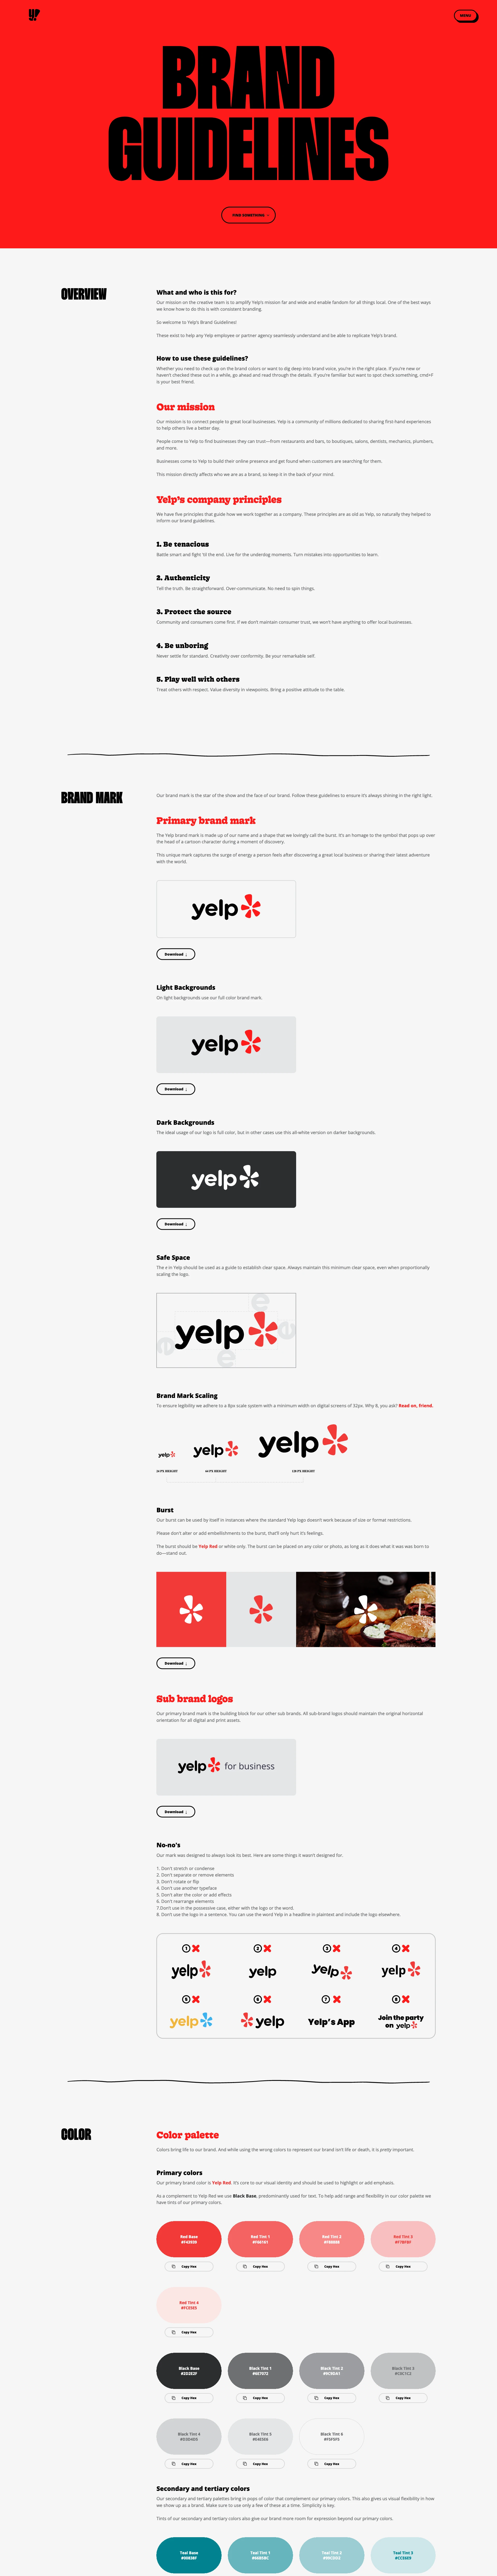 Yelp Creative Landing Page Example: We are a group of creative folks whose sole purpose is to enable fandom inside and out of Yelp. We don’t just make pretty things. We make things that move people—to take action, and to feel. Because our work is only as good as the fans* it creates.